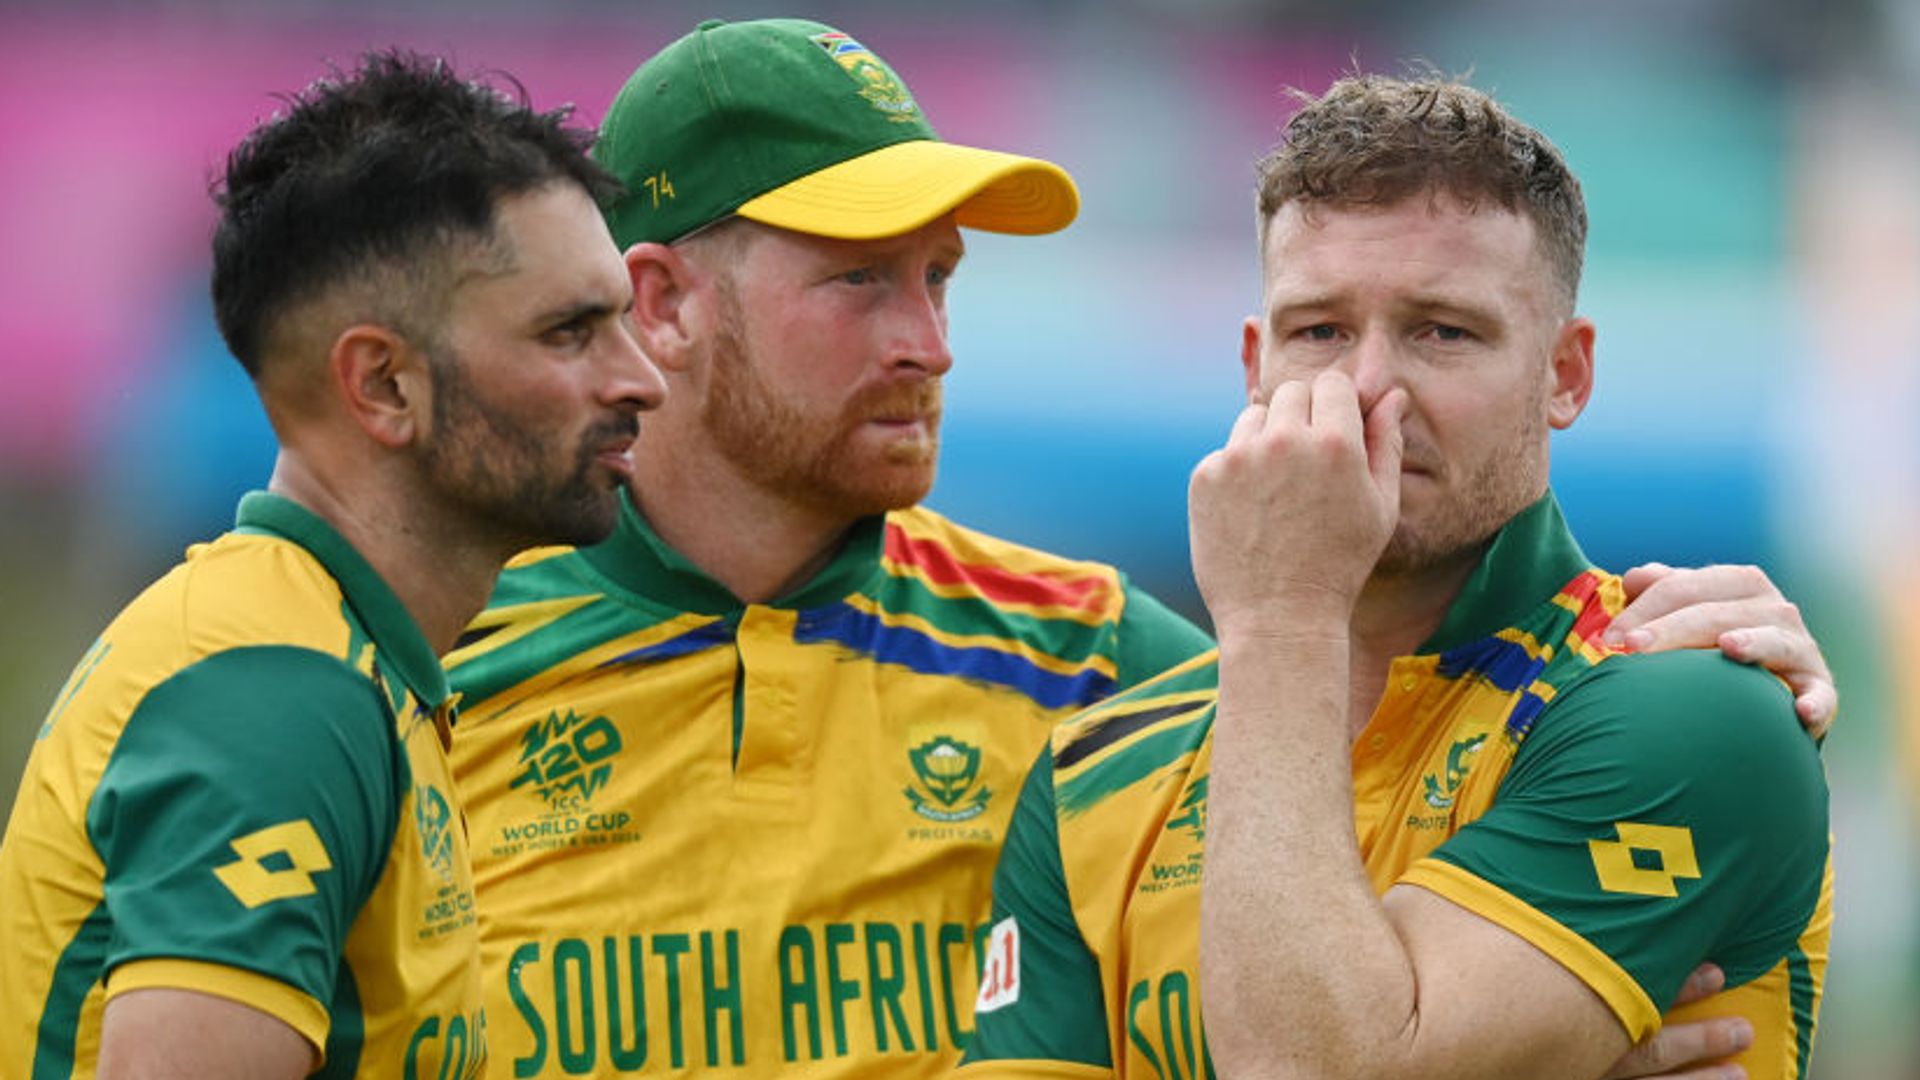 South Africa 'gutted' after 'spectacularly falling apart'